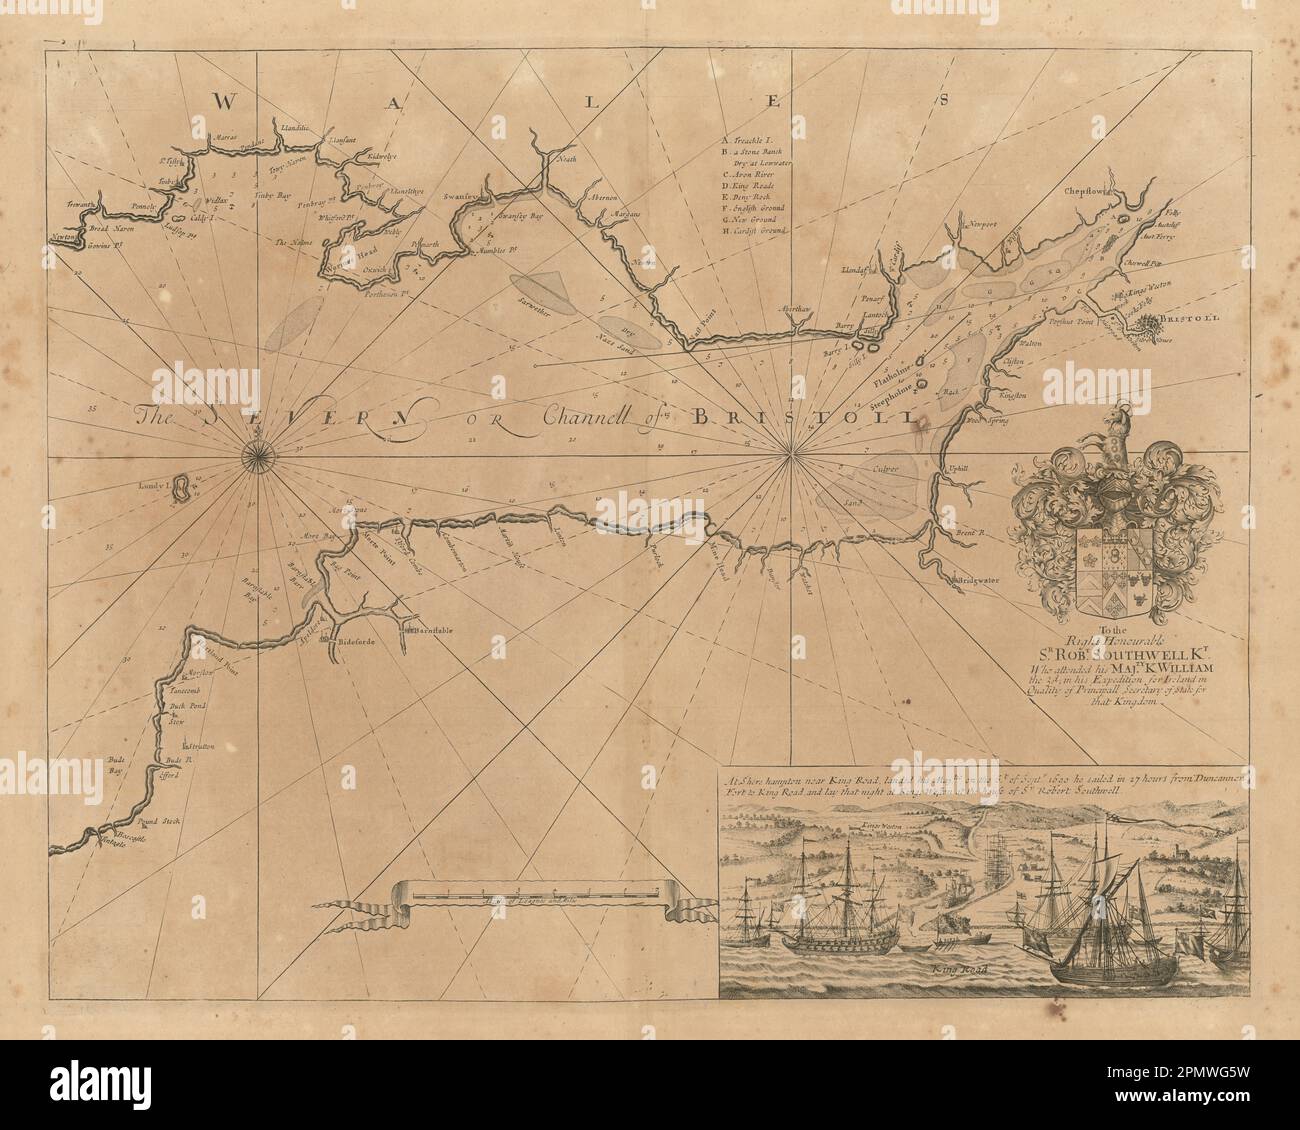 The Severn or Channell of Bristoll sea/estuary chart by Capt COLLINS 1693 map Stock Photo